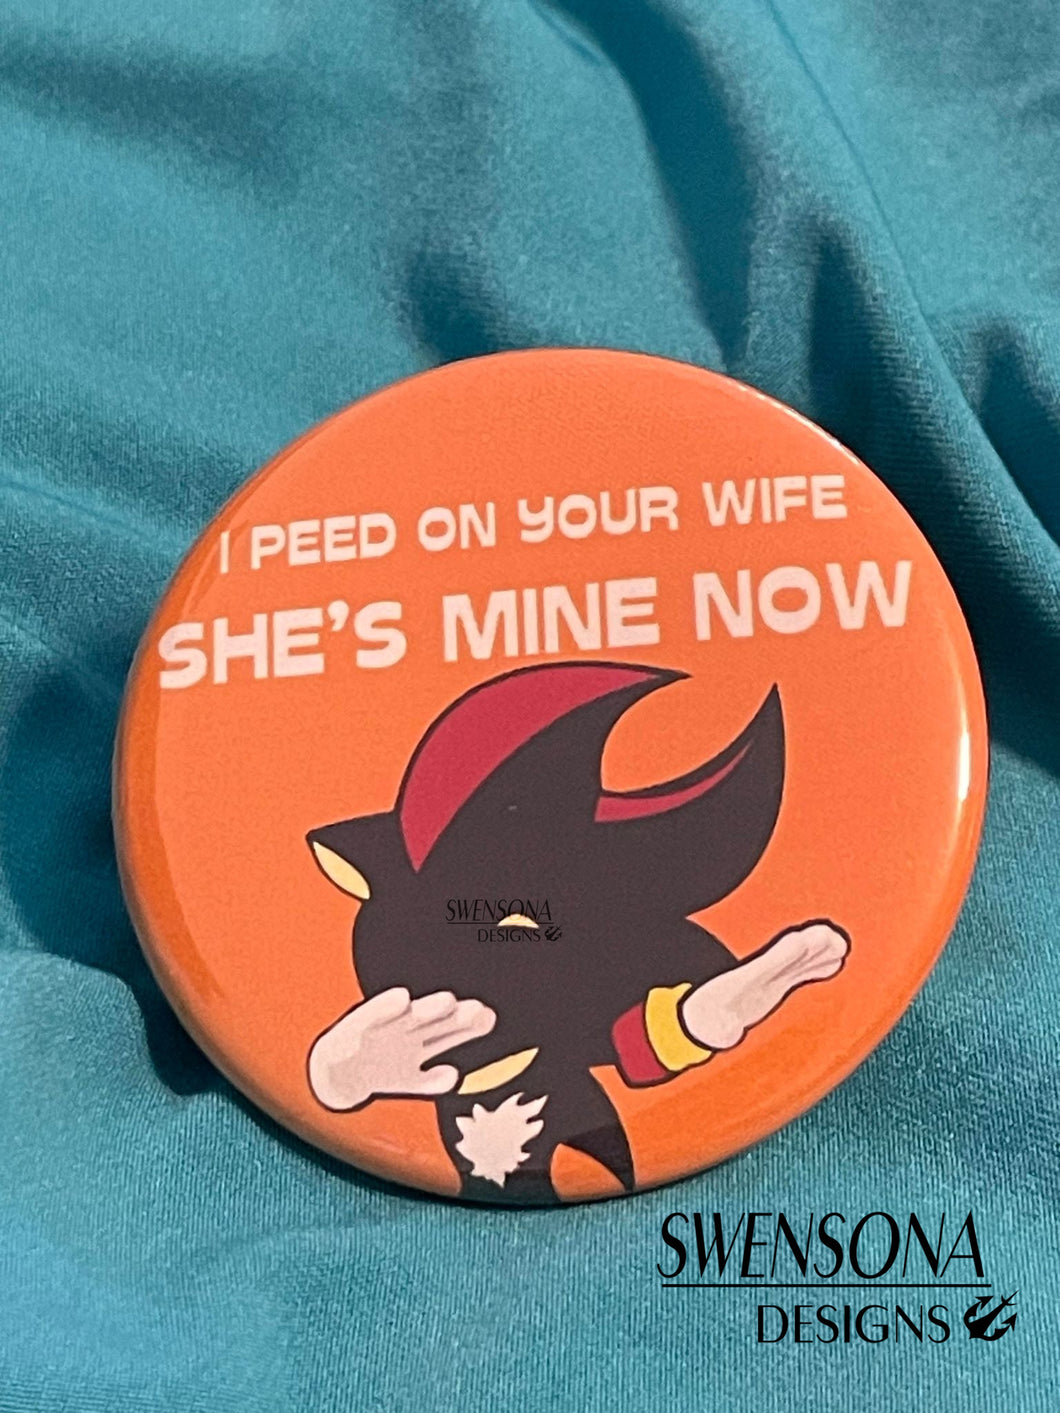 I peed on your wife button badge